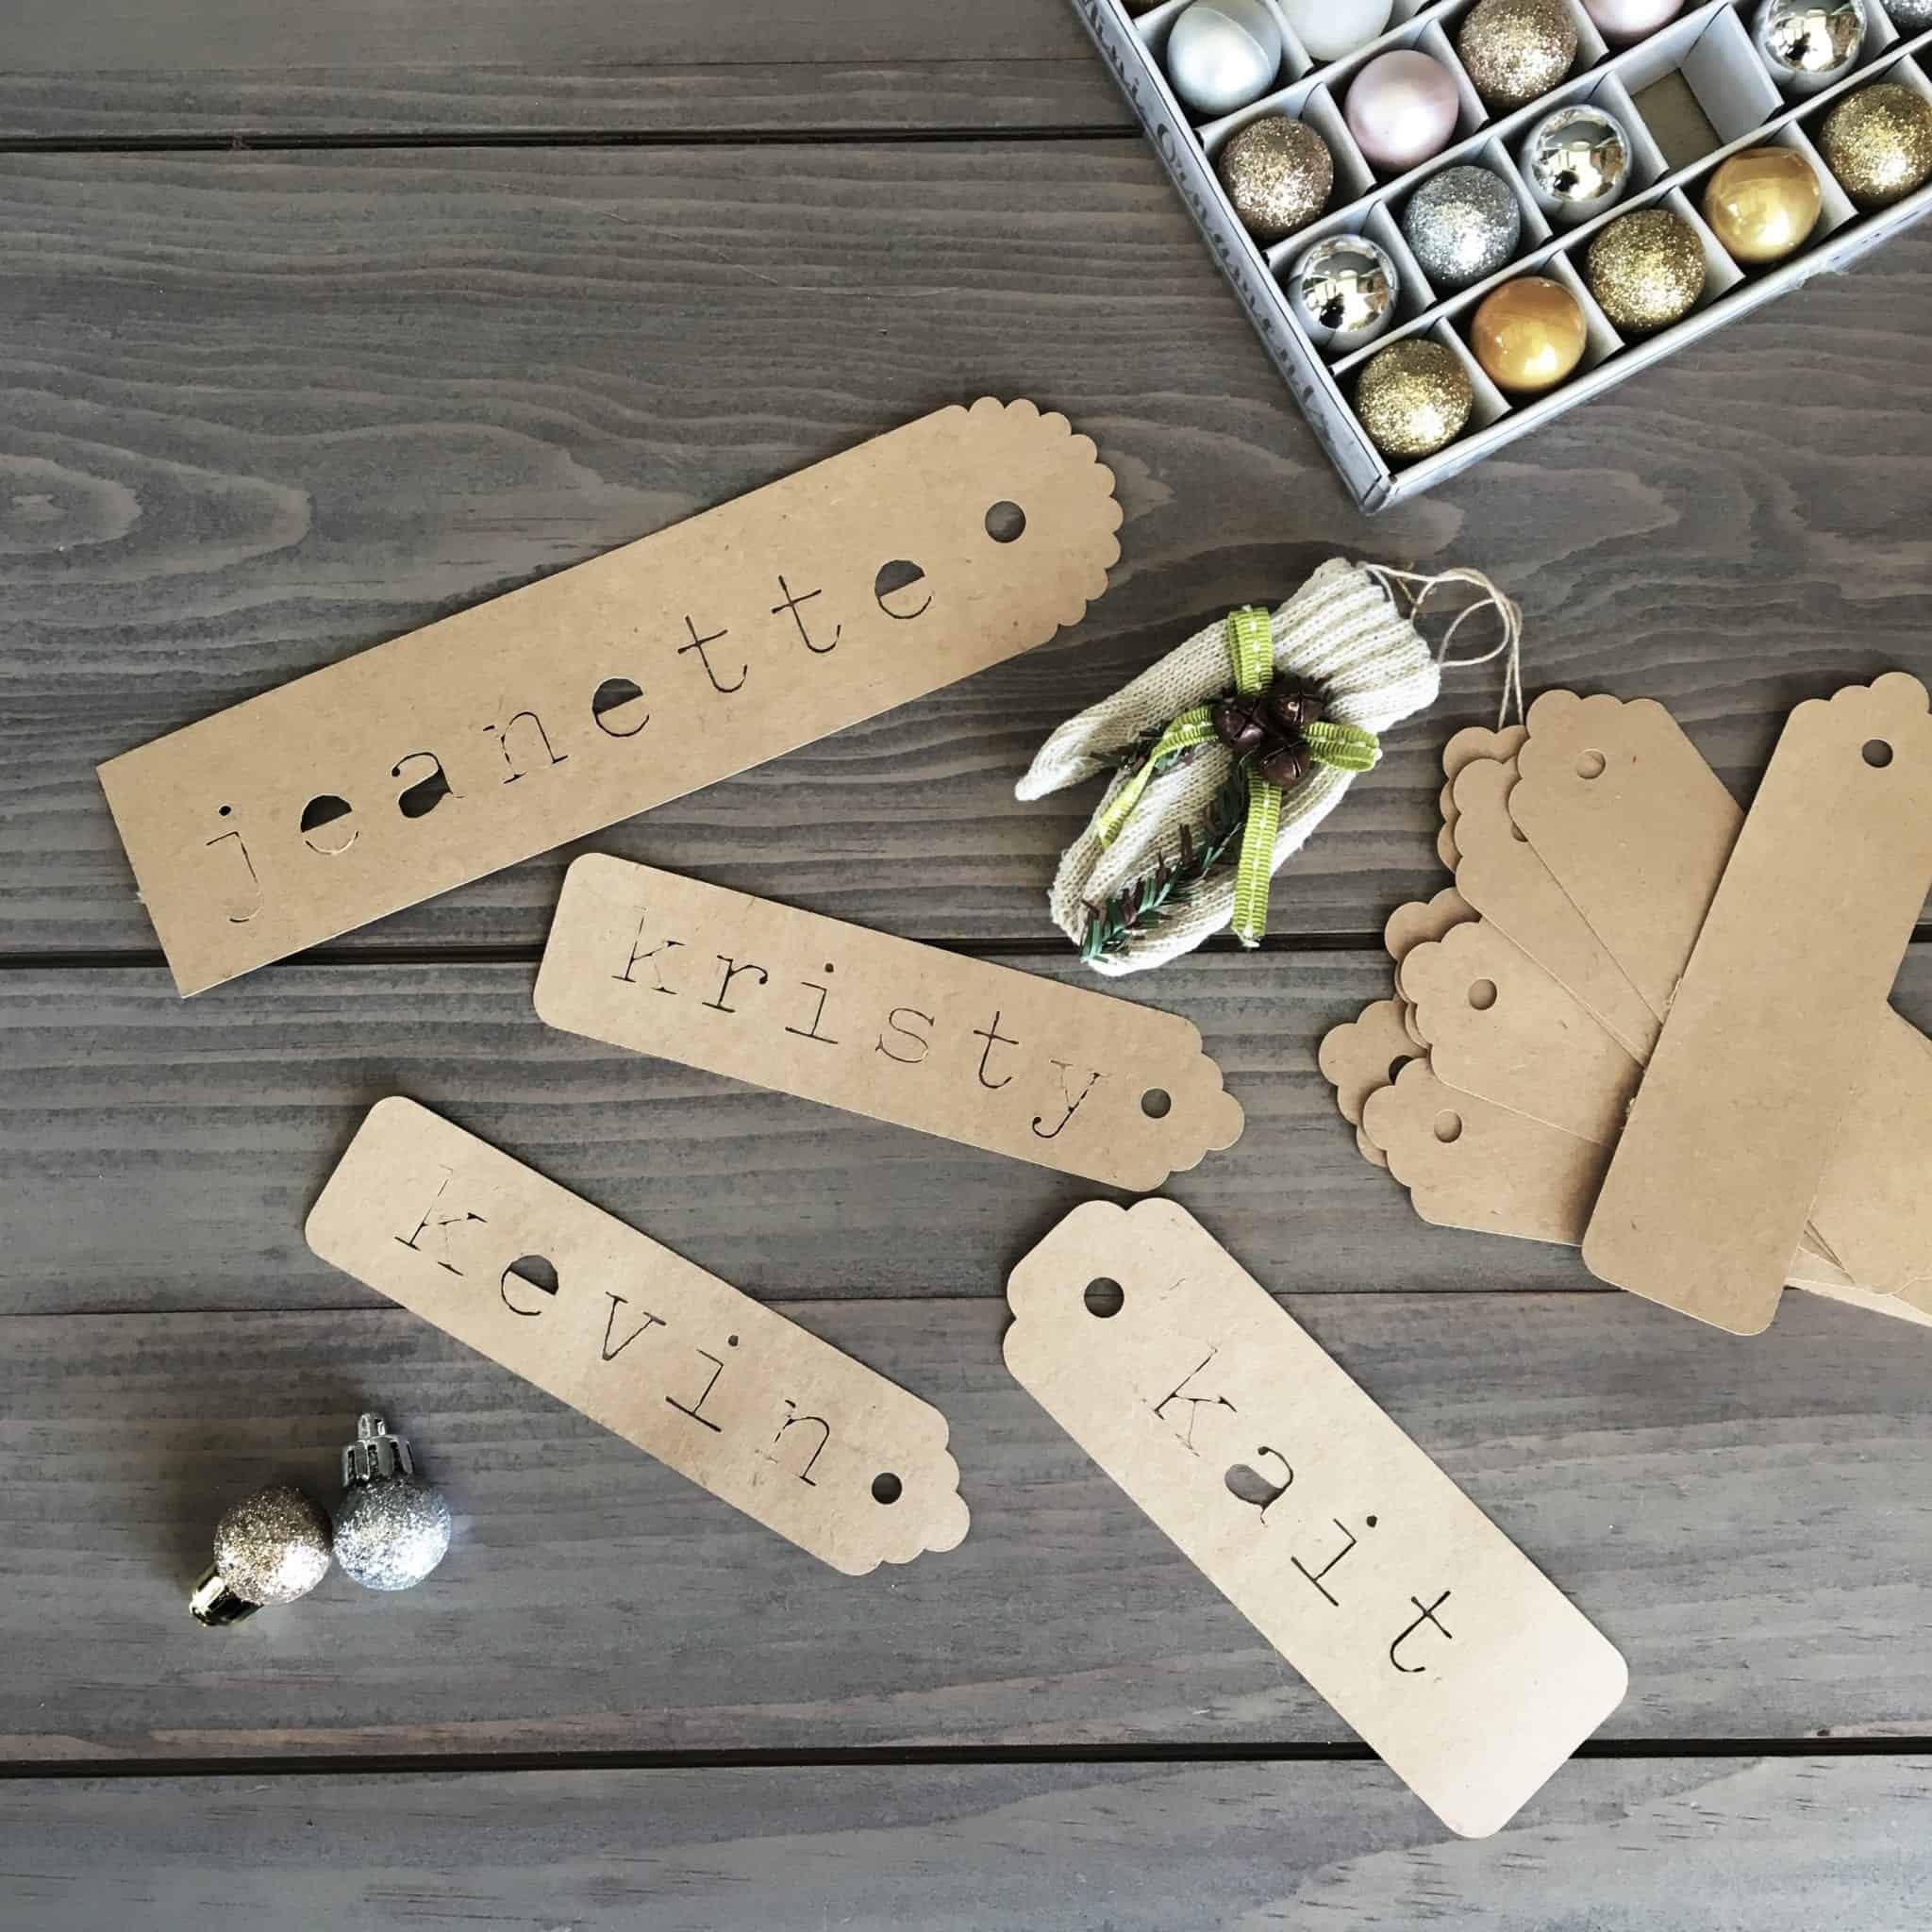 Modern Rustic Holiday Home Tour 2017 Gift Tags Made with Silhouette Cameo